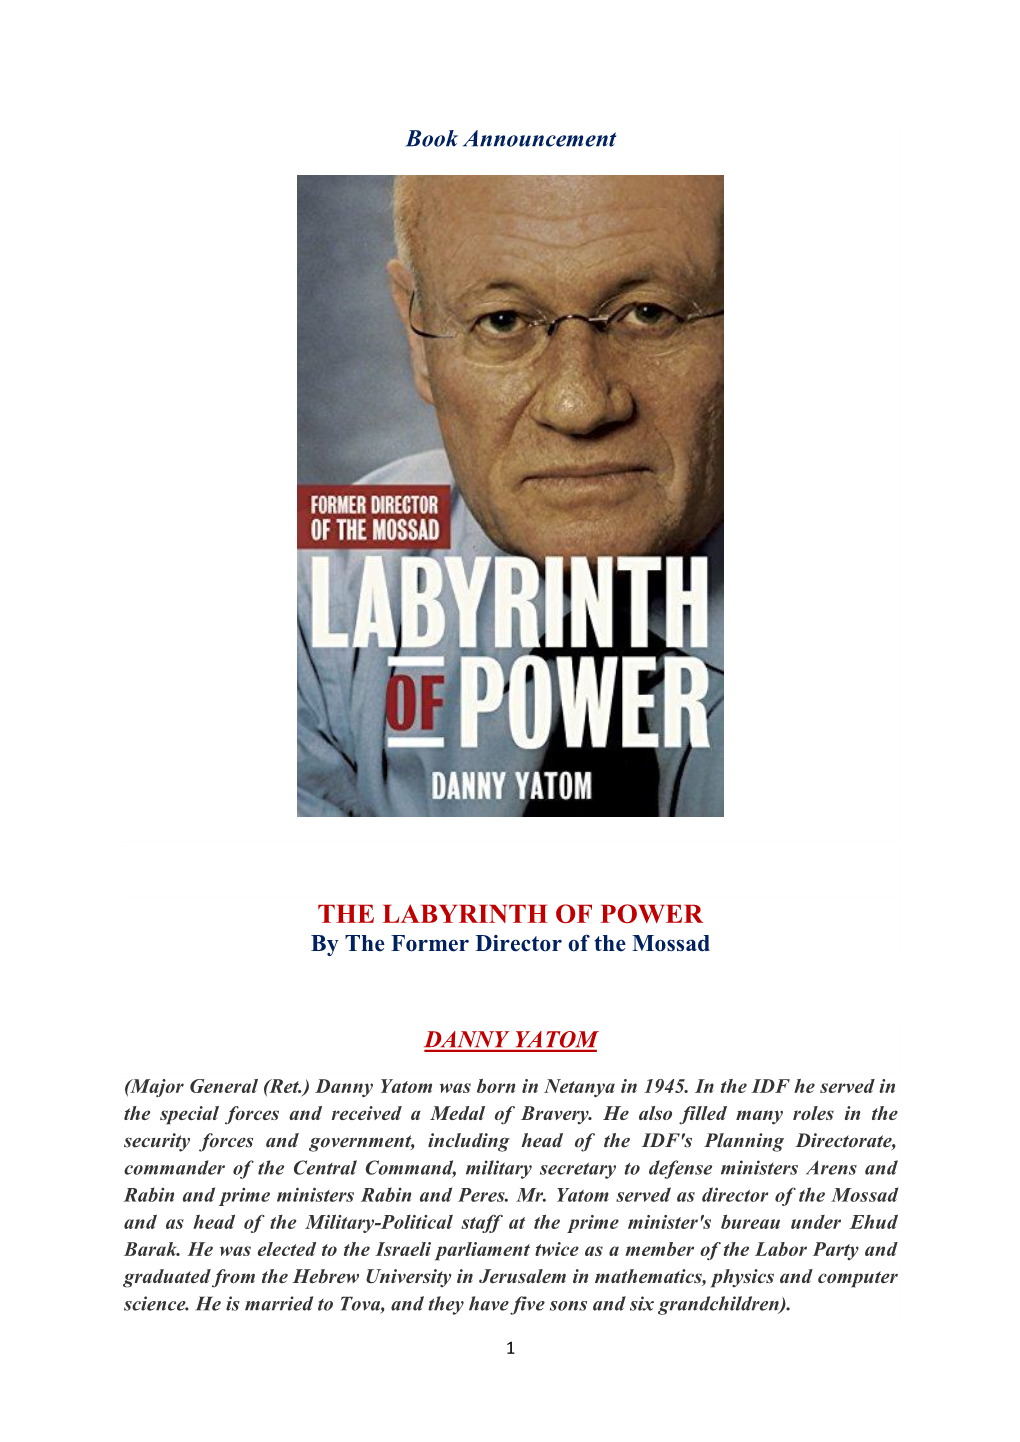 THE LABYRINTH of POWER by the Former Director of the Mossad